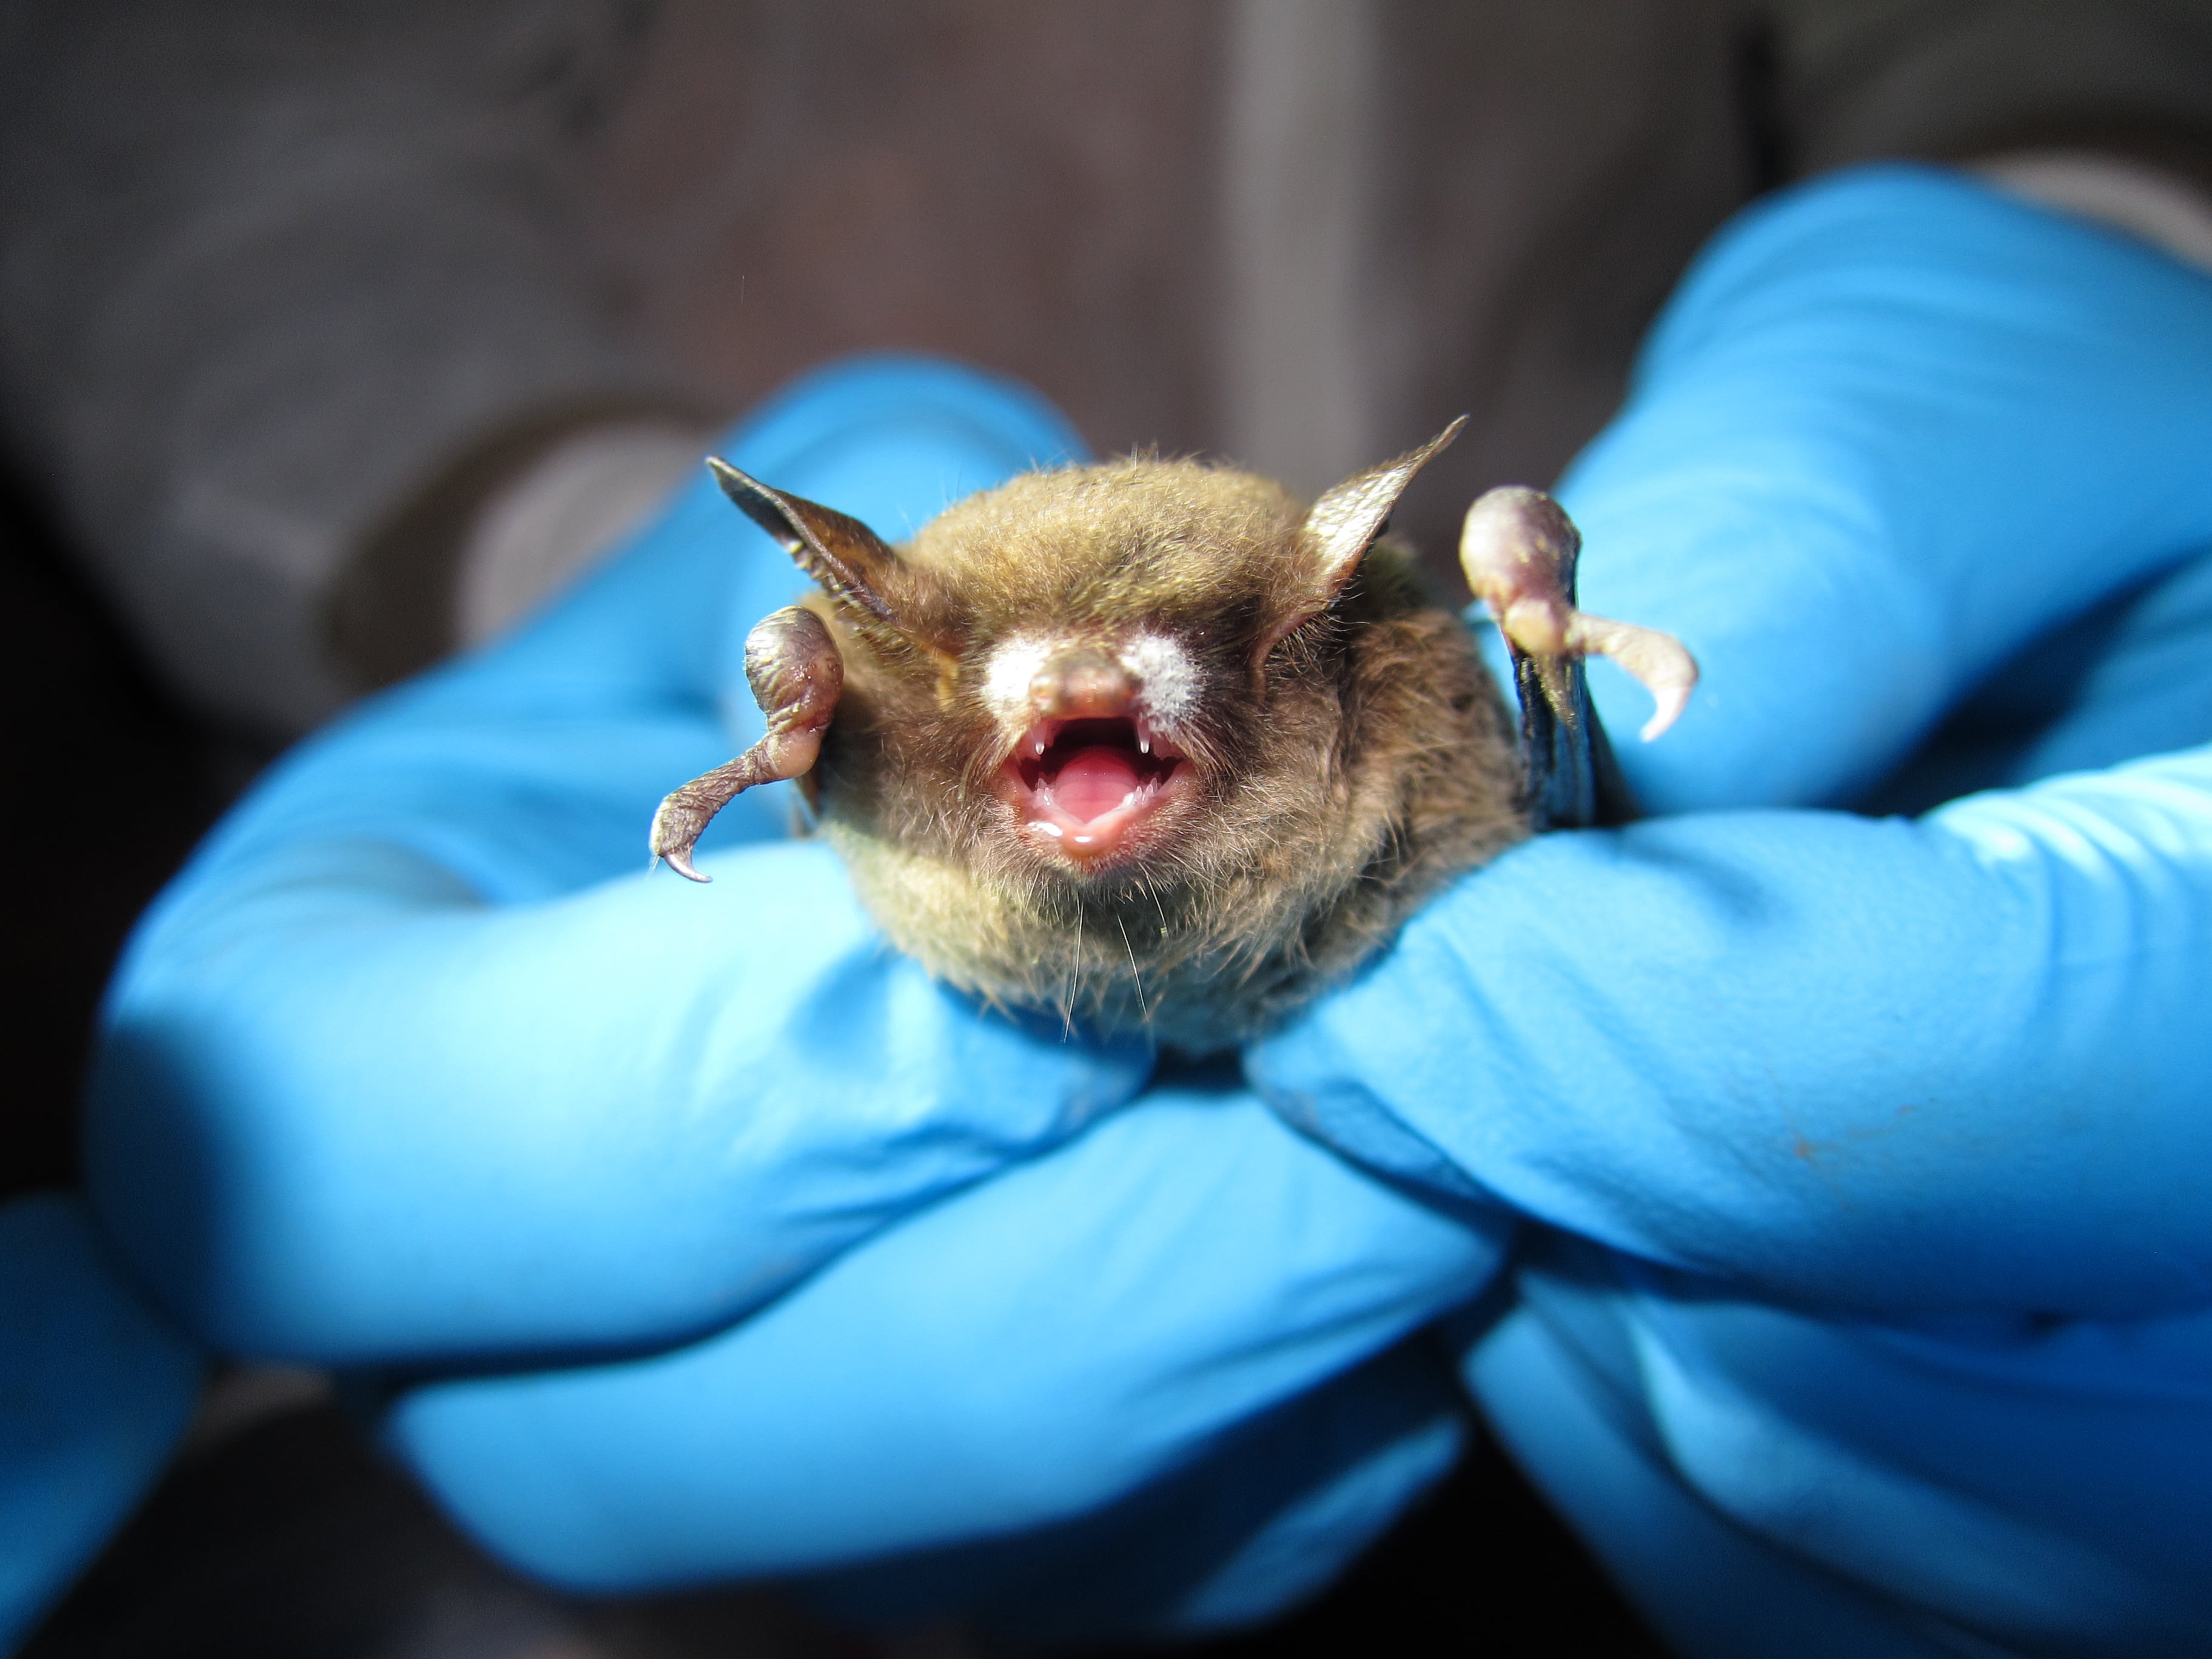 Public urged to report bats to monitor spread of deadly White-Nose Syndrome disease